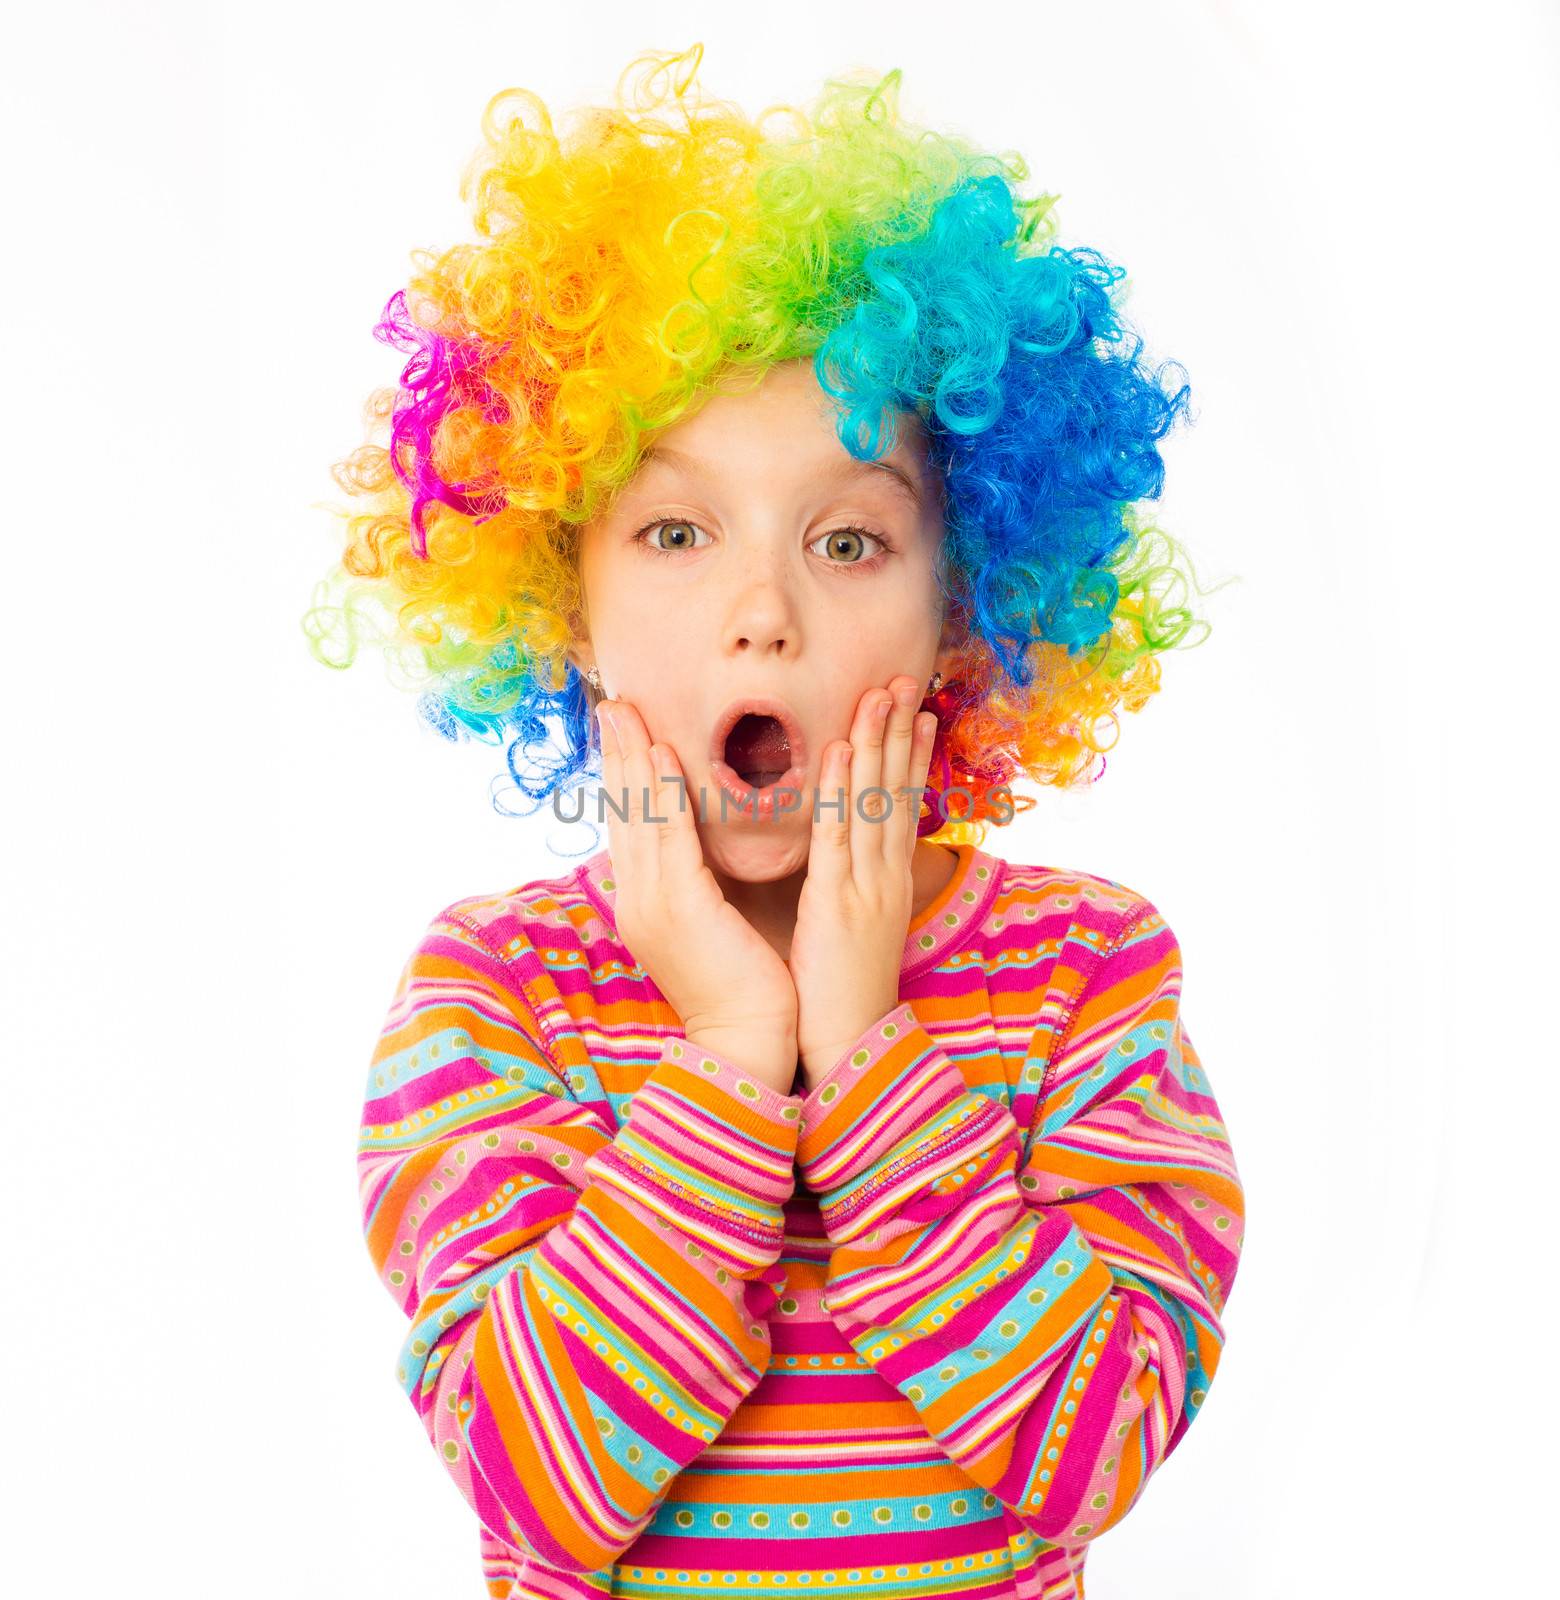 surprised little girl in clown wig isolated on white background